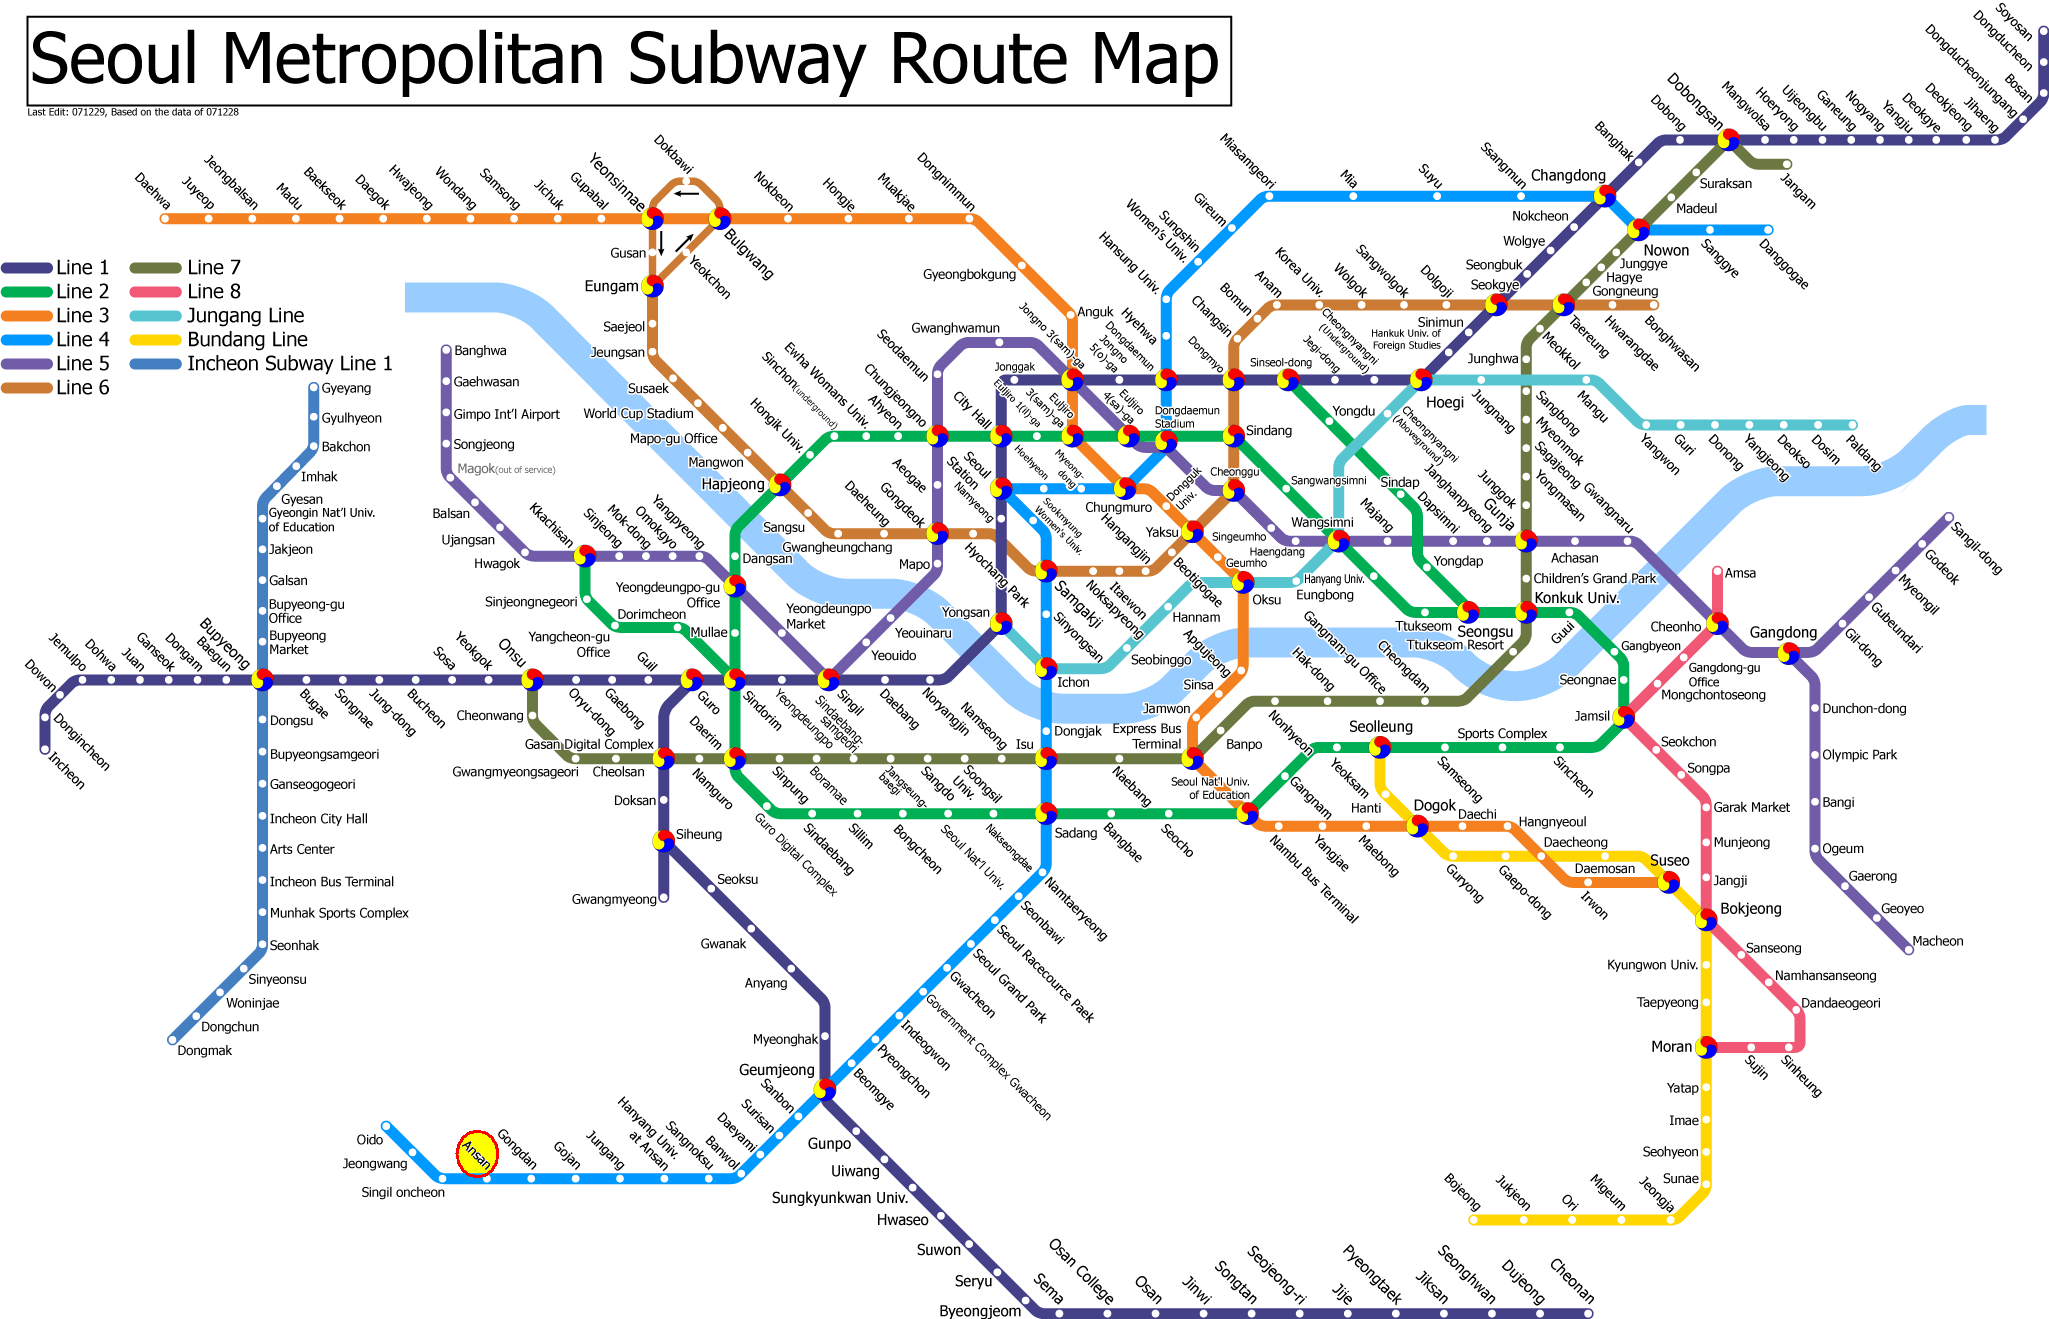 Subway map of Seoul, to help find an apartment in Korea